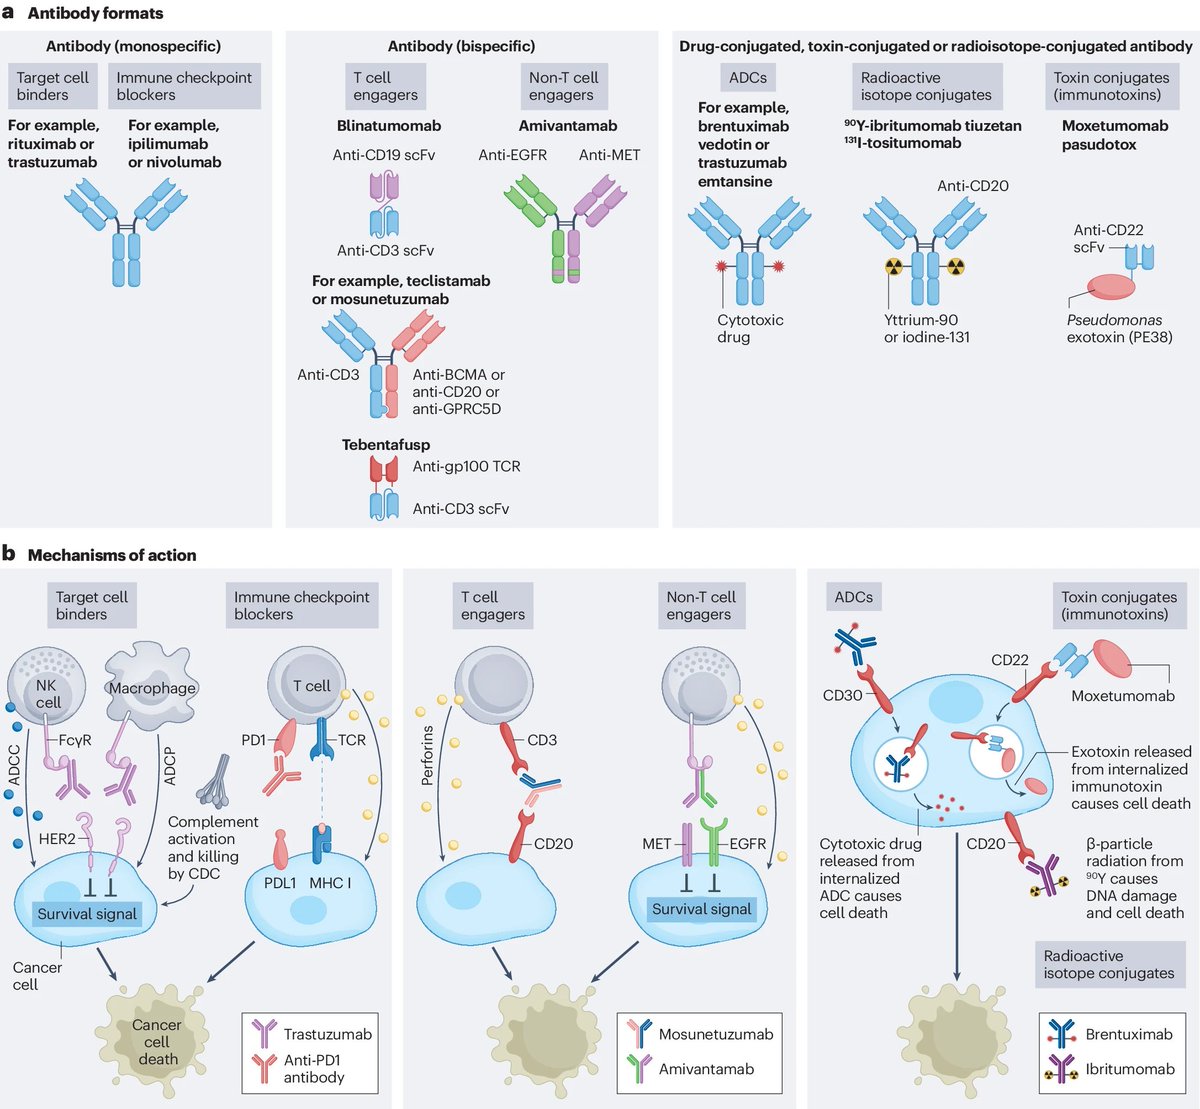 Don´t miss this Review summarizing the different antibody-based approaches for targeting cancer cells including #CheckpointInhibitors, bispecific antibodies and #AntibodyDrugConjugates, as well as strategies that improve efficacy and reduce toxicities. go.nature.com/3wWetGE